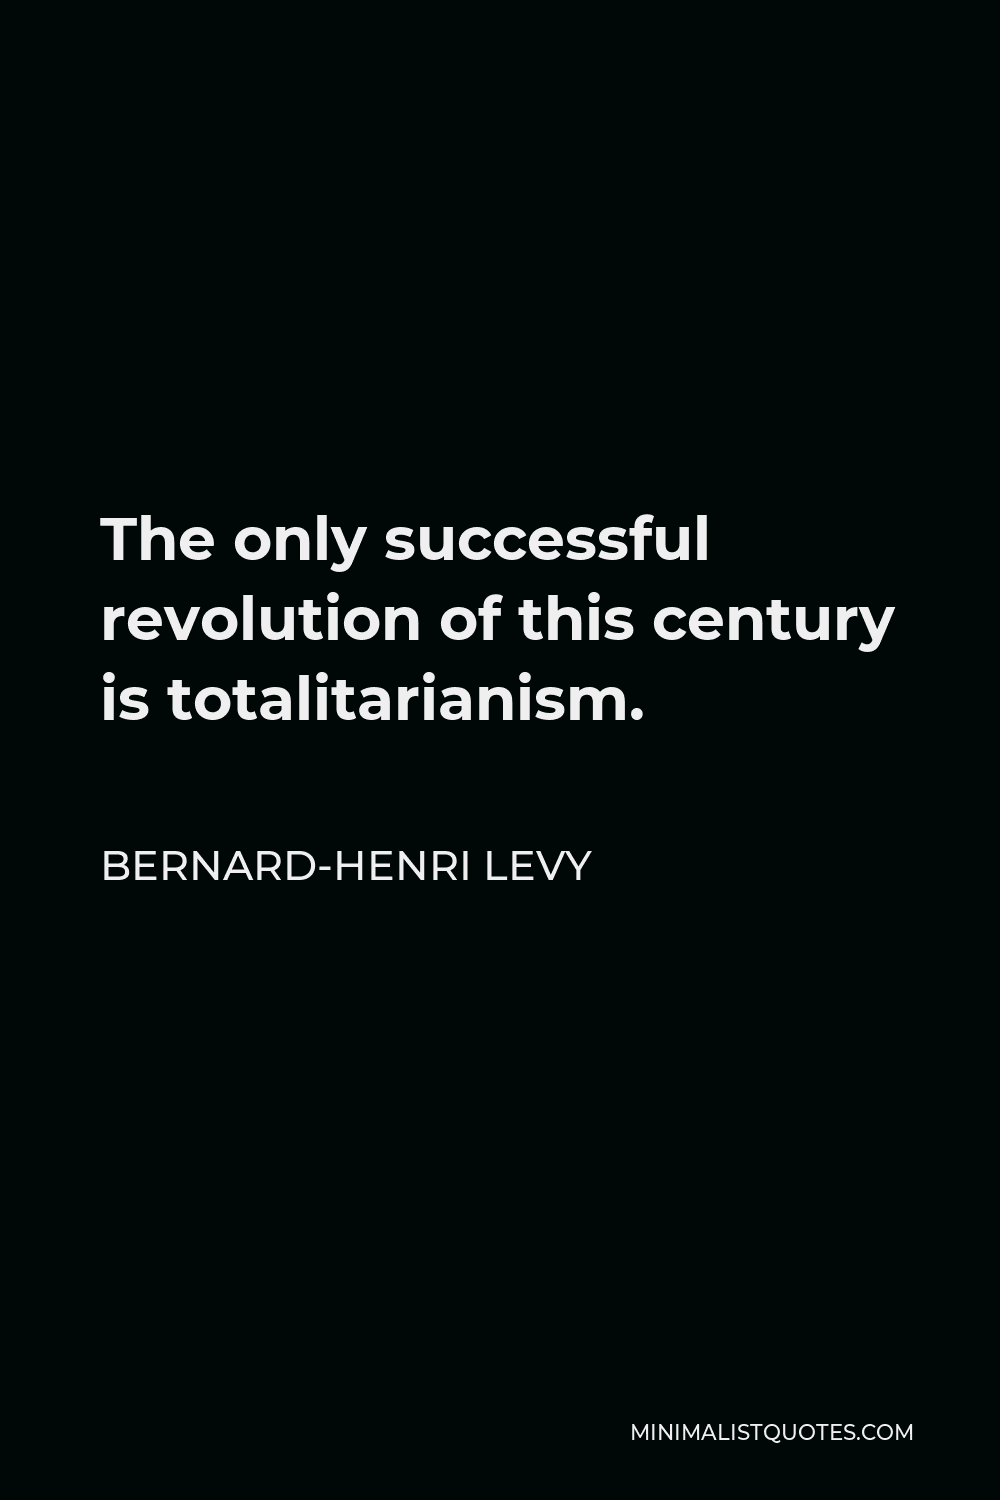 Bernard-Henri Levy Quote - The only successful revolution of this century is totalitarianism.